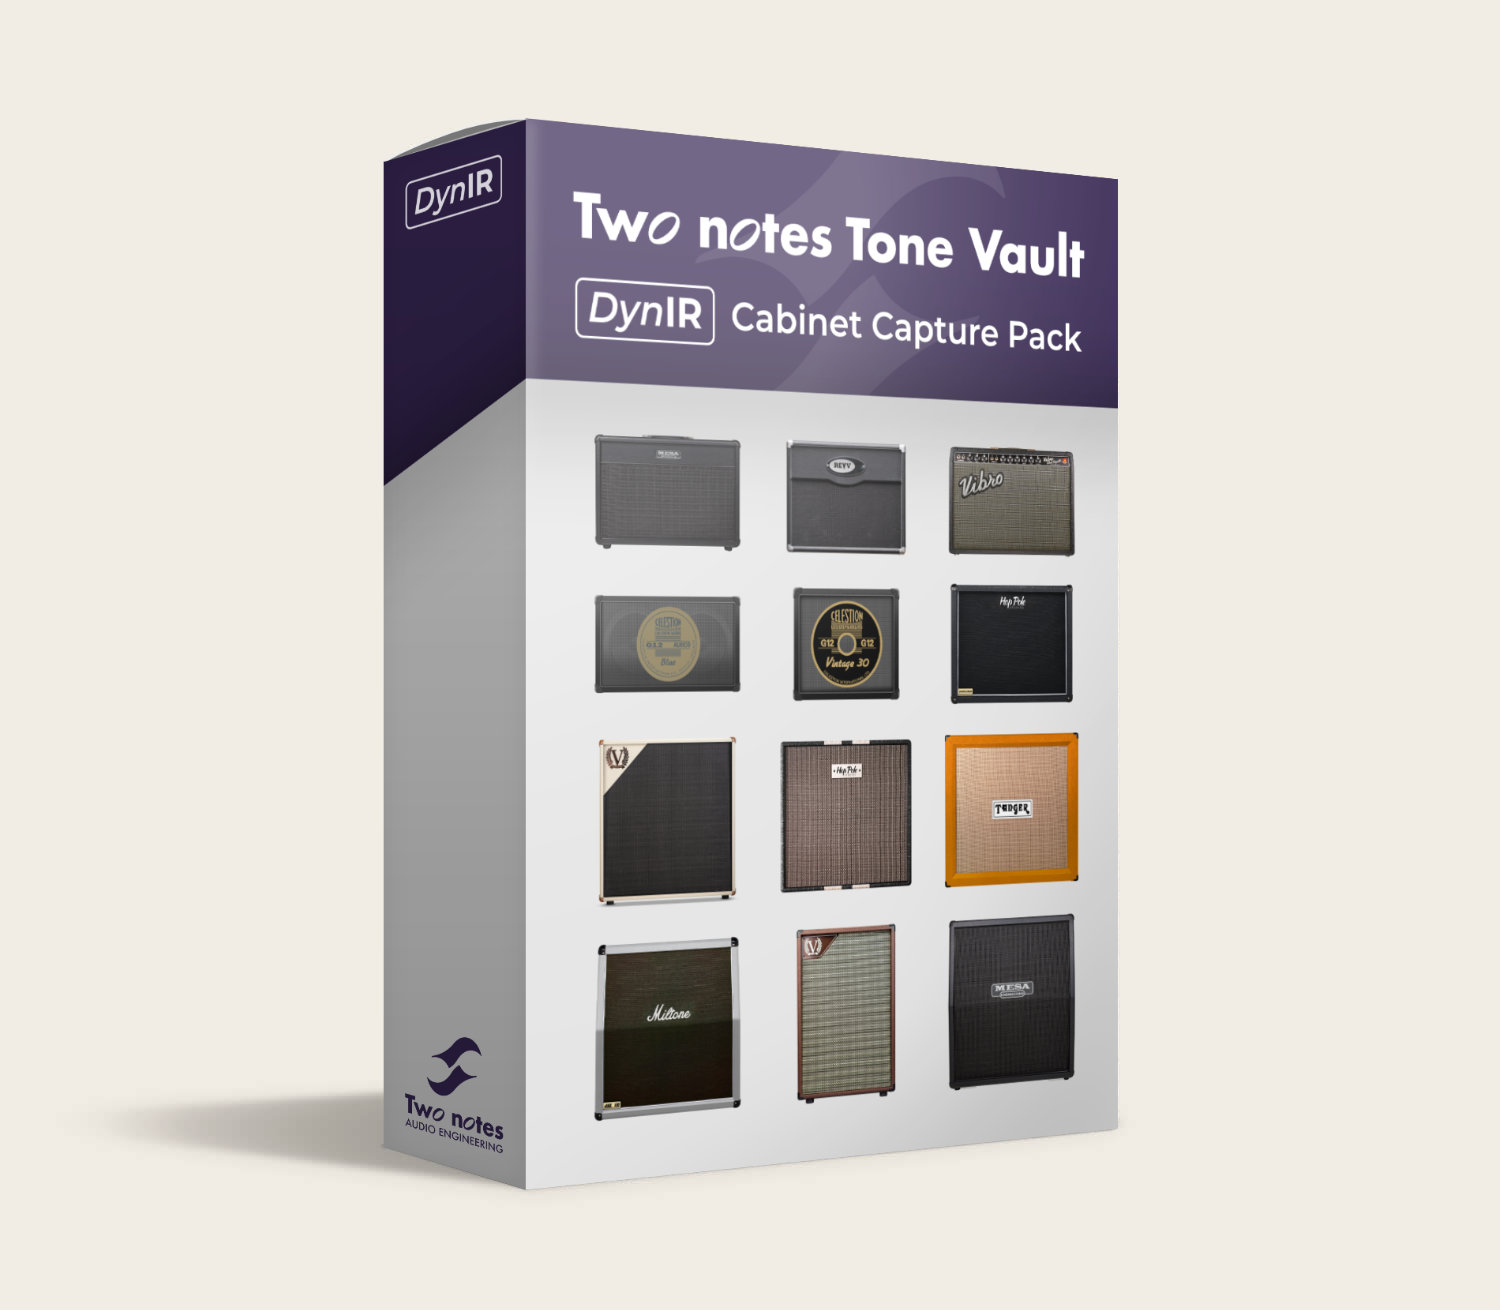 www.two-notes.com